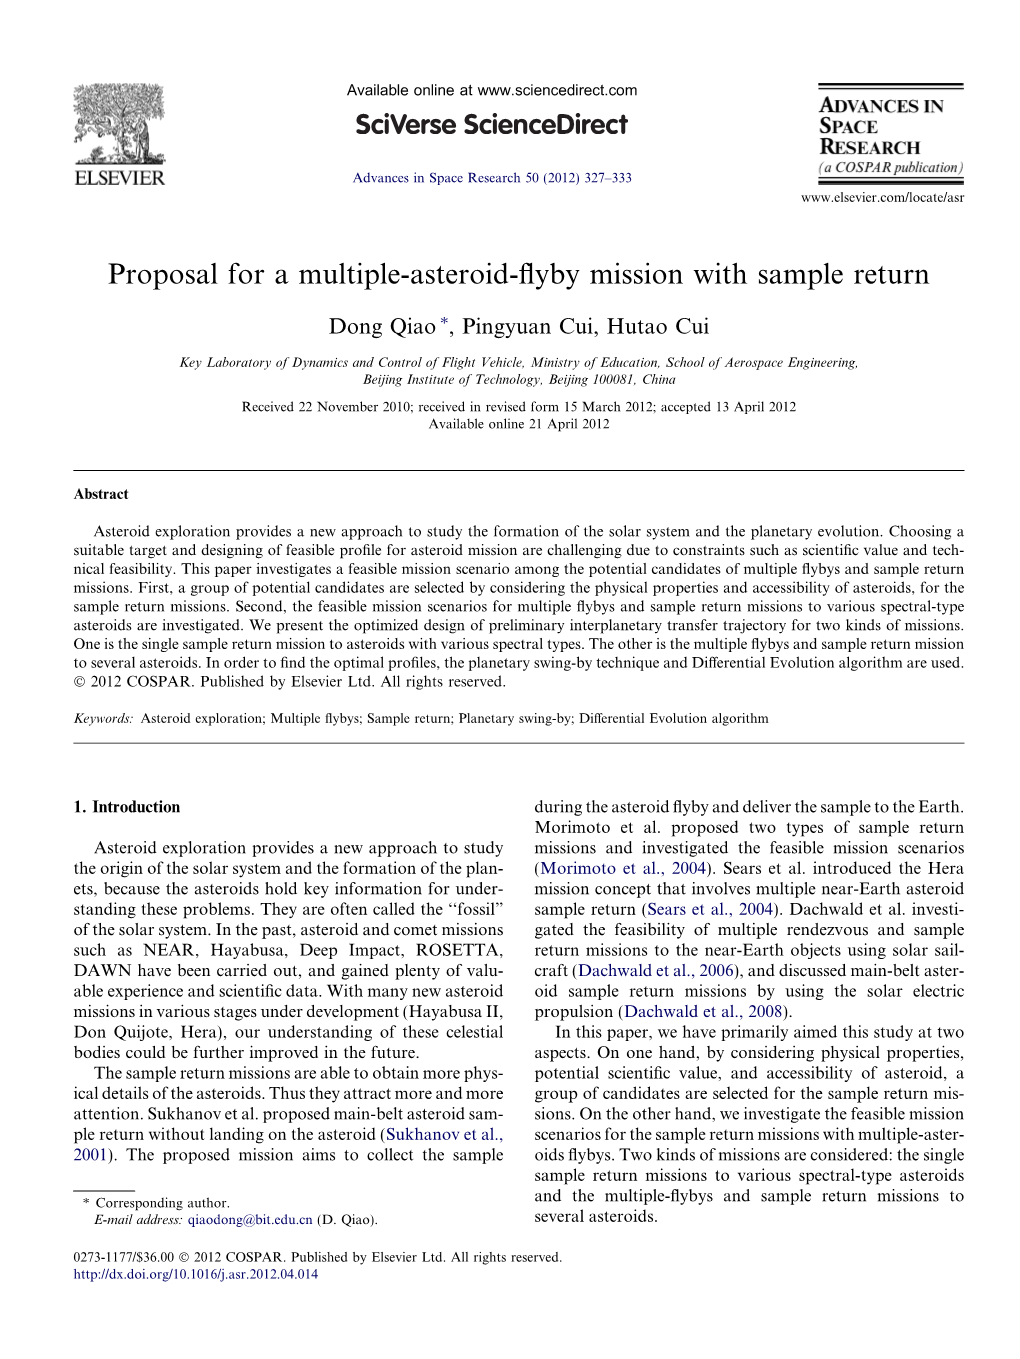 Proposal for a Multiple-Asteroid-Flyby Mission with Sample Return